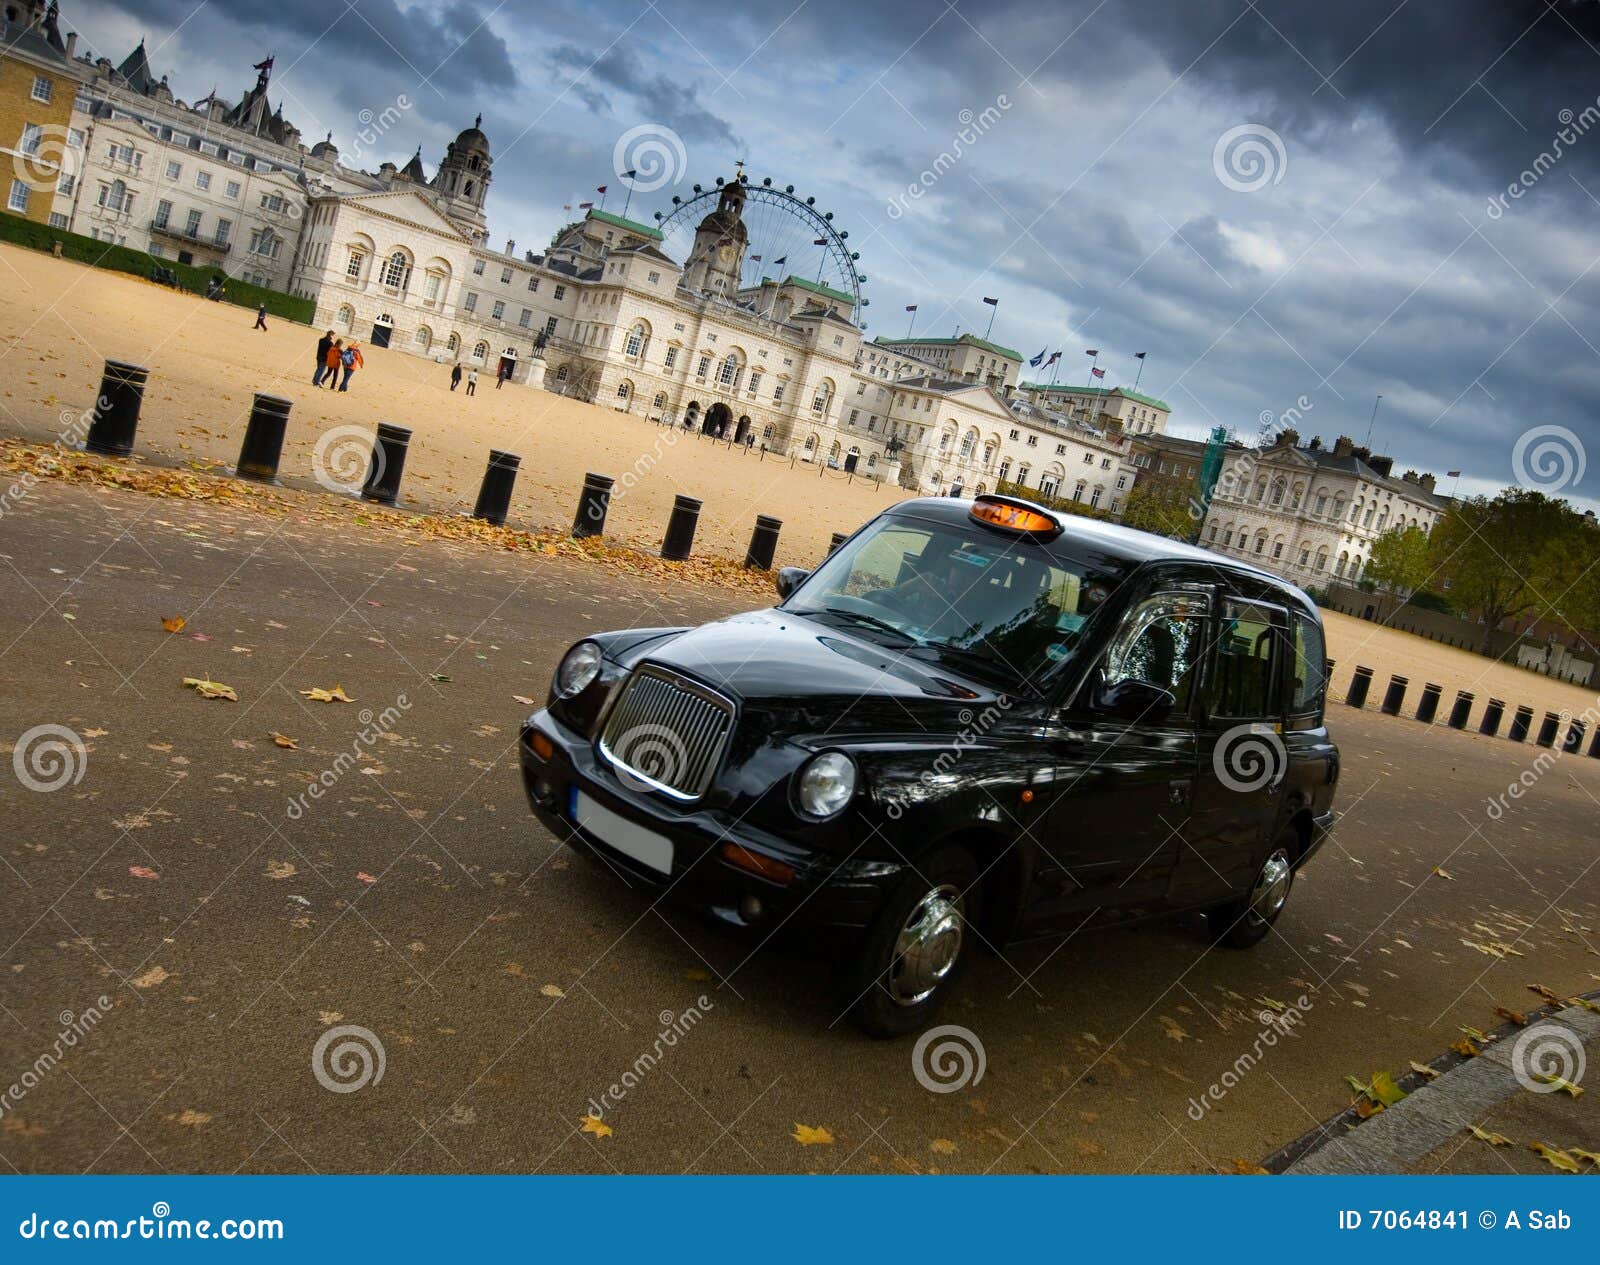 black taxi cab in london